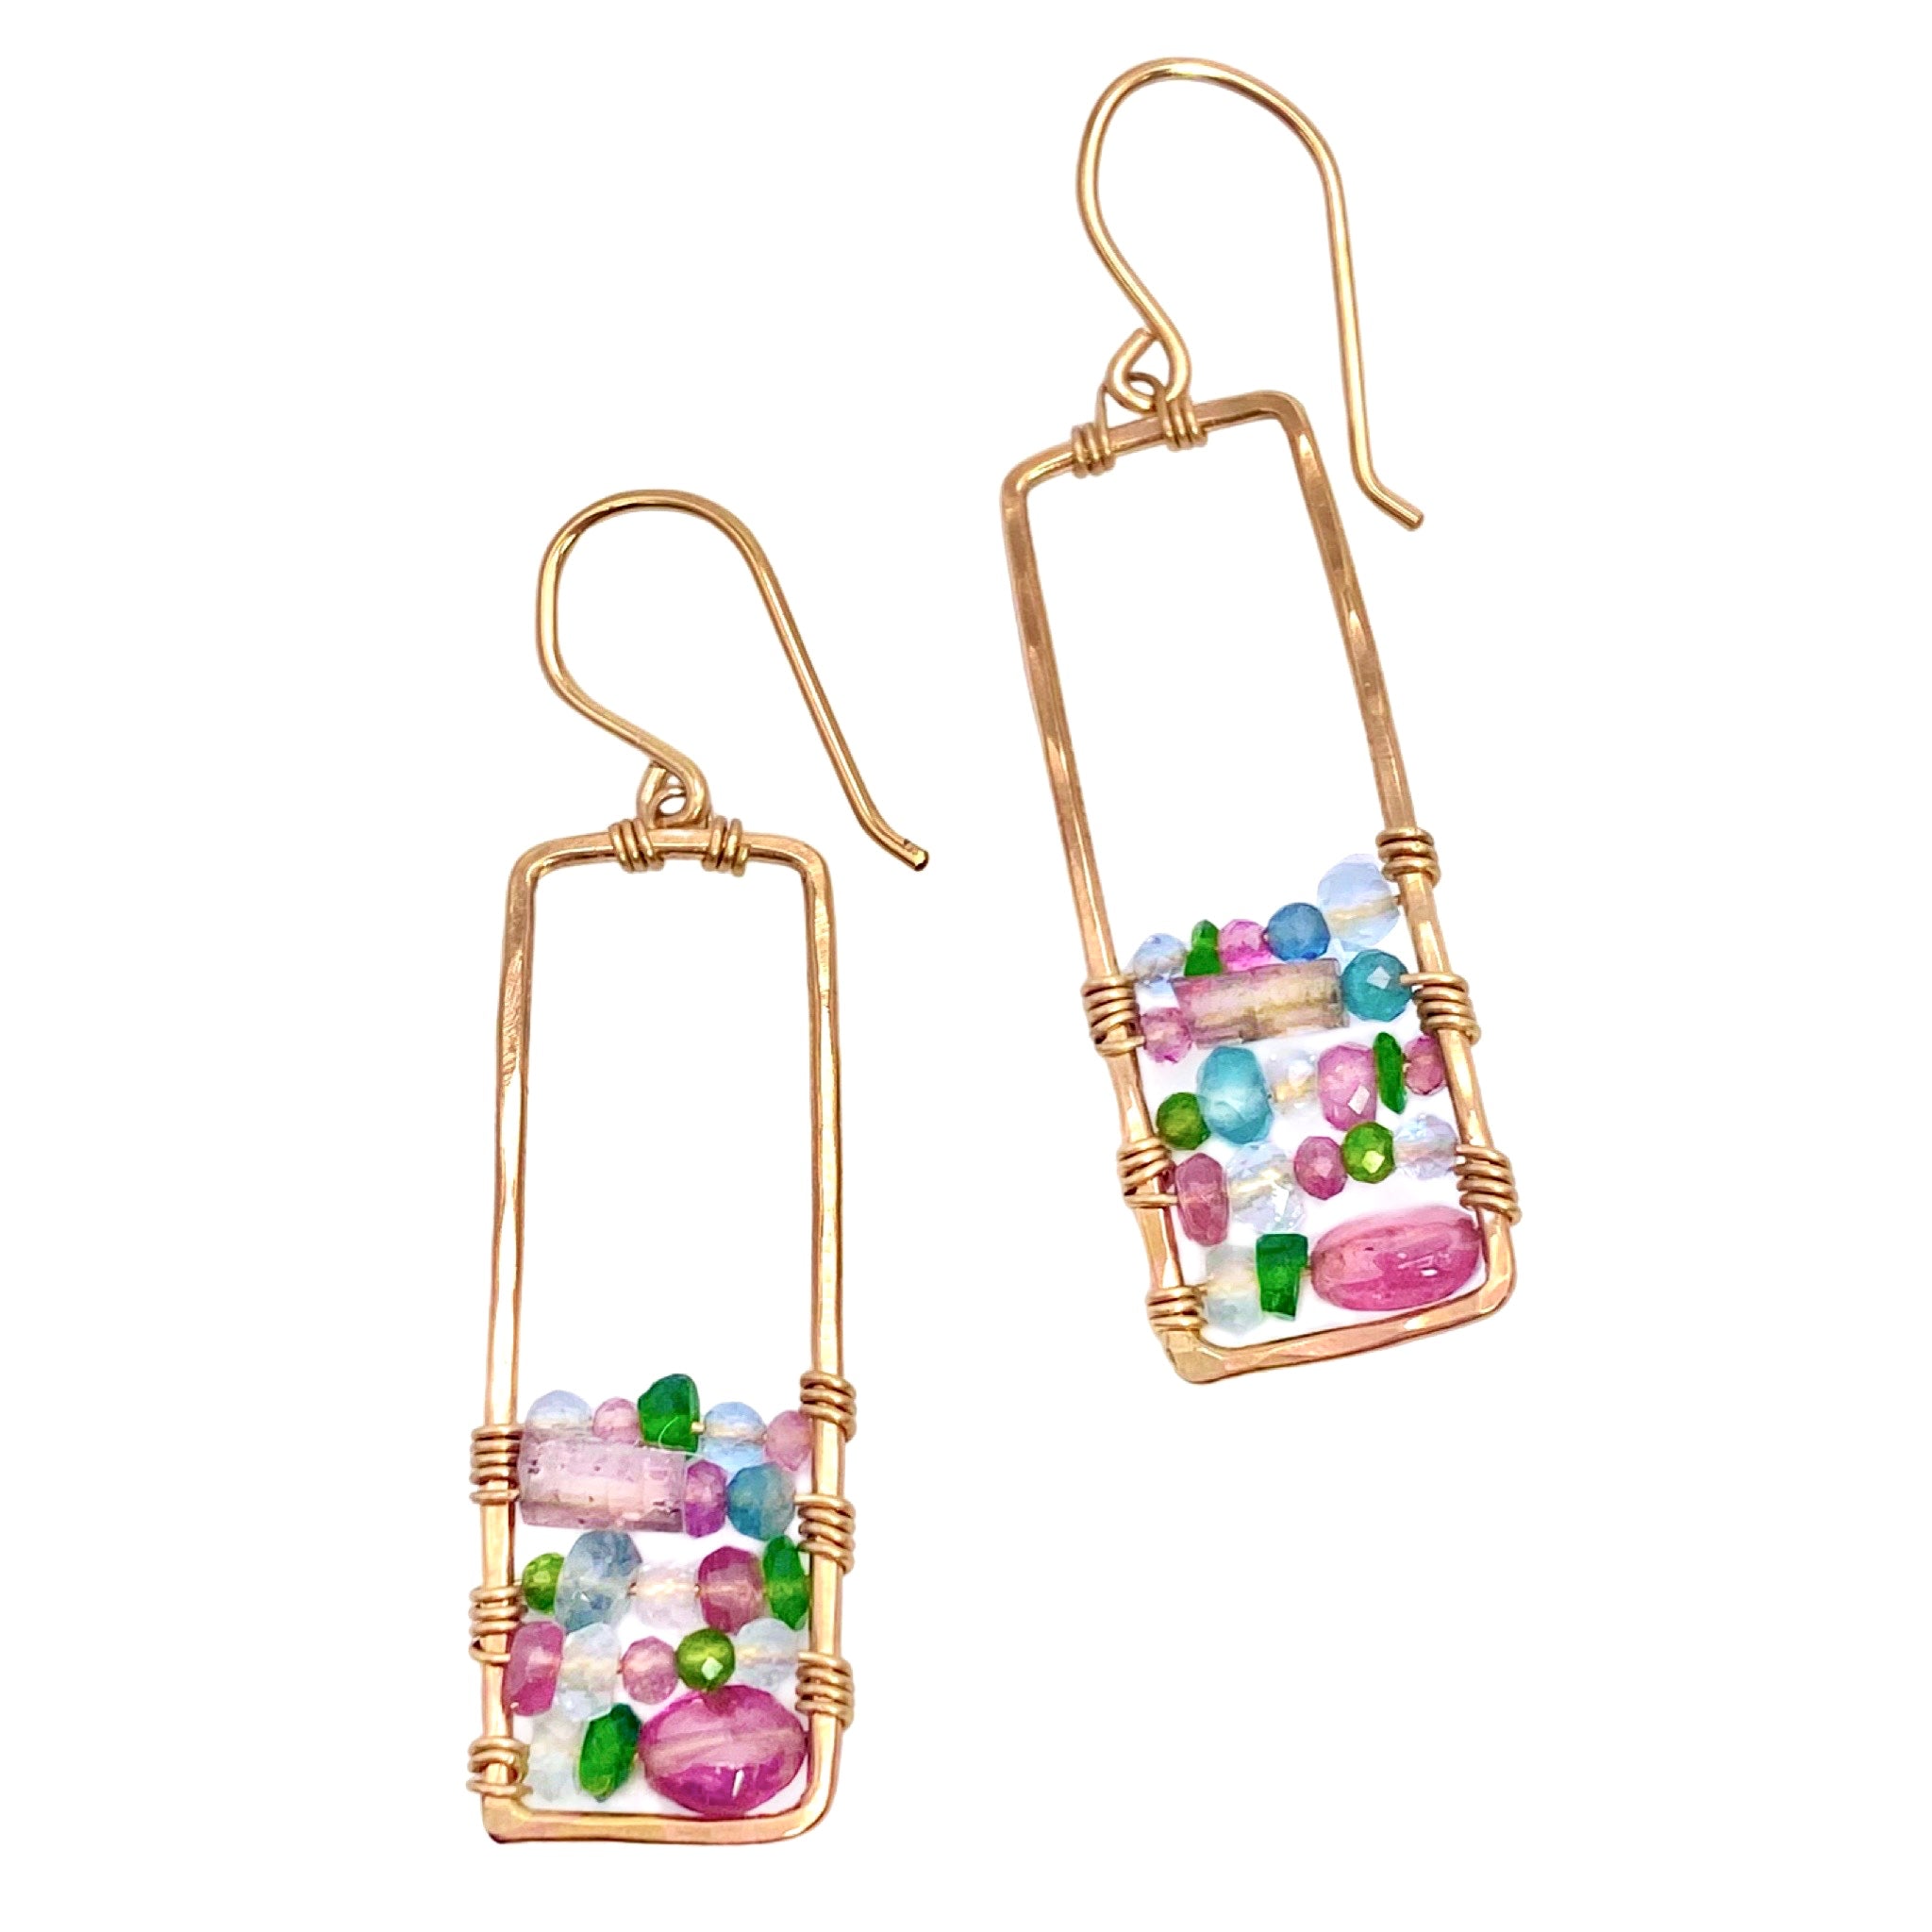 Vannucci Tourmaline Stained Glass Earrings - Available at Shaylula Jewlery & Gifts in Tarrytown, NY and online. Playful and modern, these earrings feature a hand-hammered yellow gold frame wired with a beautiful mosaic mix of tourmaline and aquamarine gemstones.  • Tourmaline, aquamarine, opal, 14k gold filled  • 1.75" L  • 14k gold fill earwire